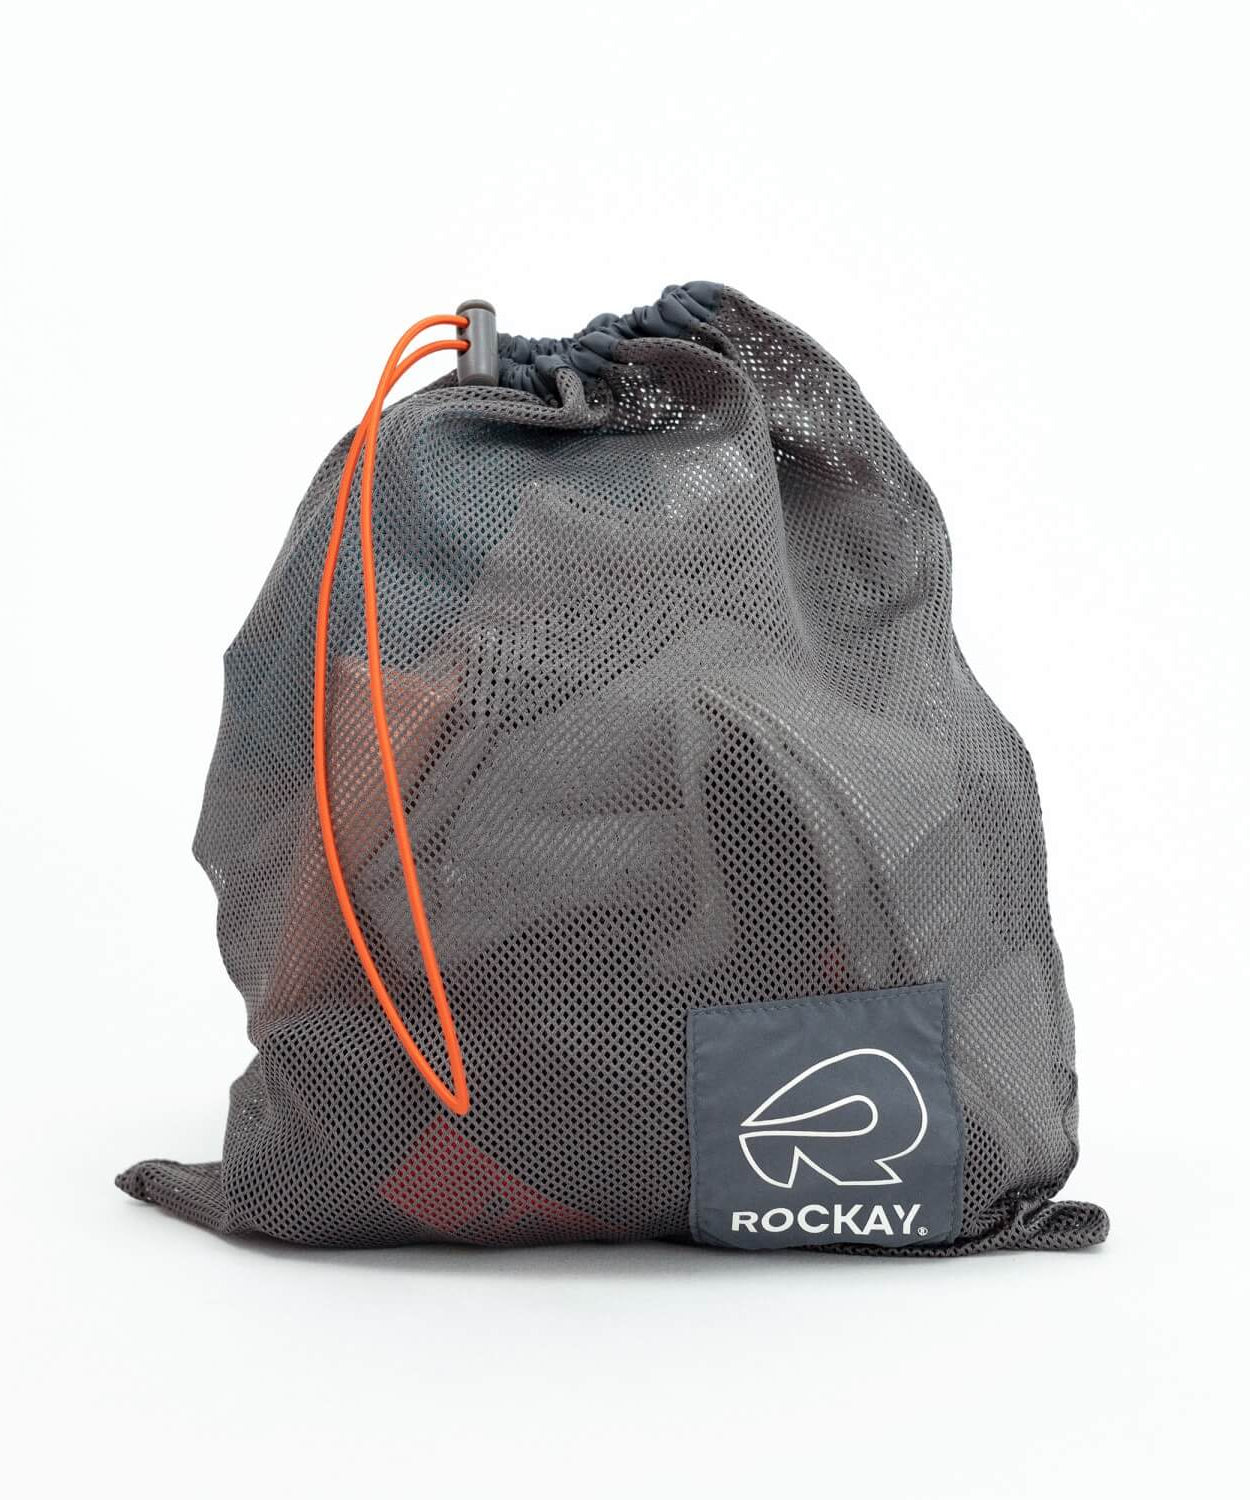 The Scrubba Wash Bag - A good way to fold the Scrubba wash bag for storing  in your pack. Simply lie the Scrubba wash bag flat and roll it up from the